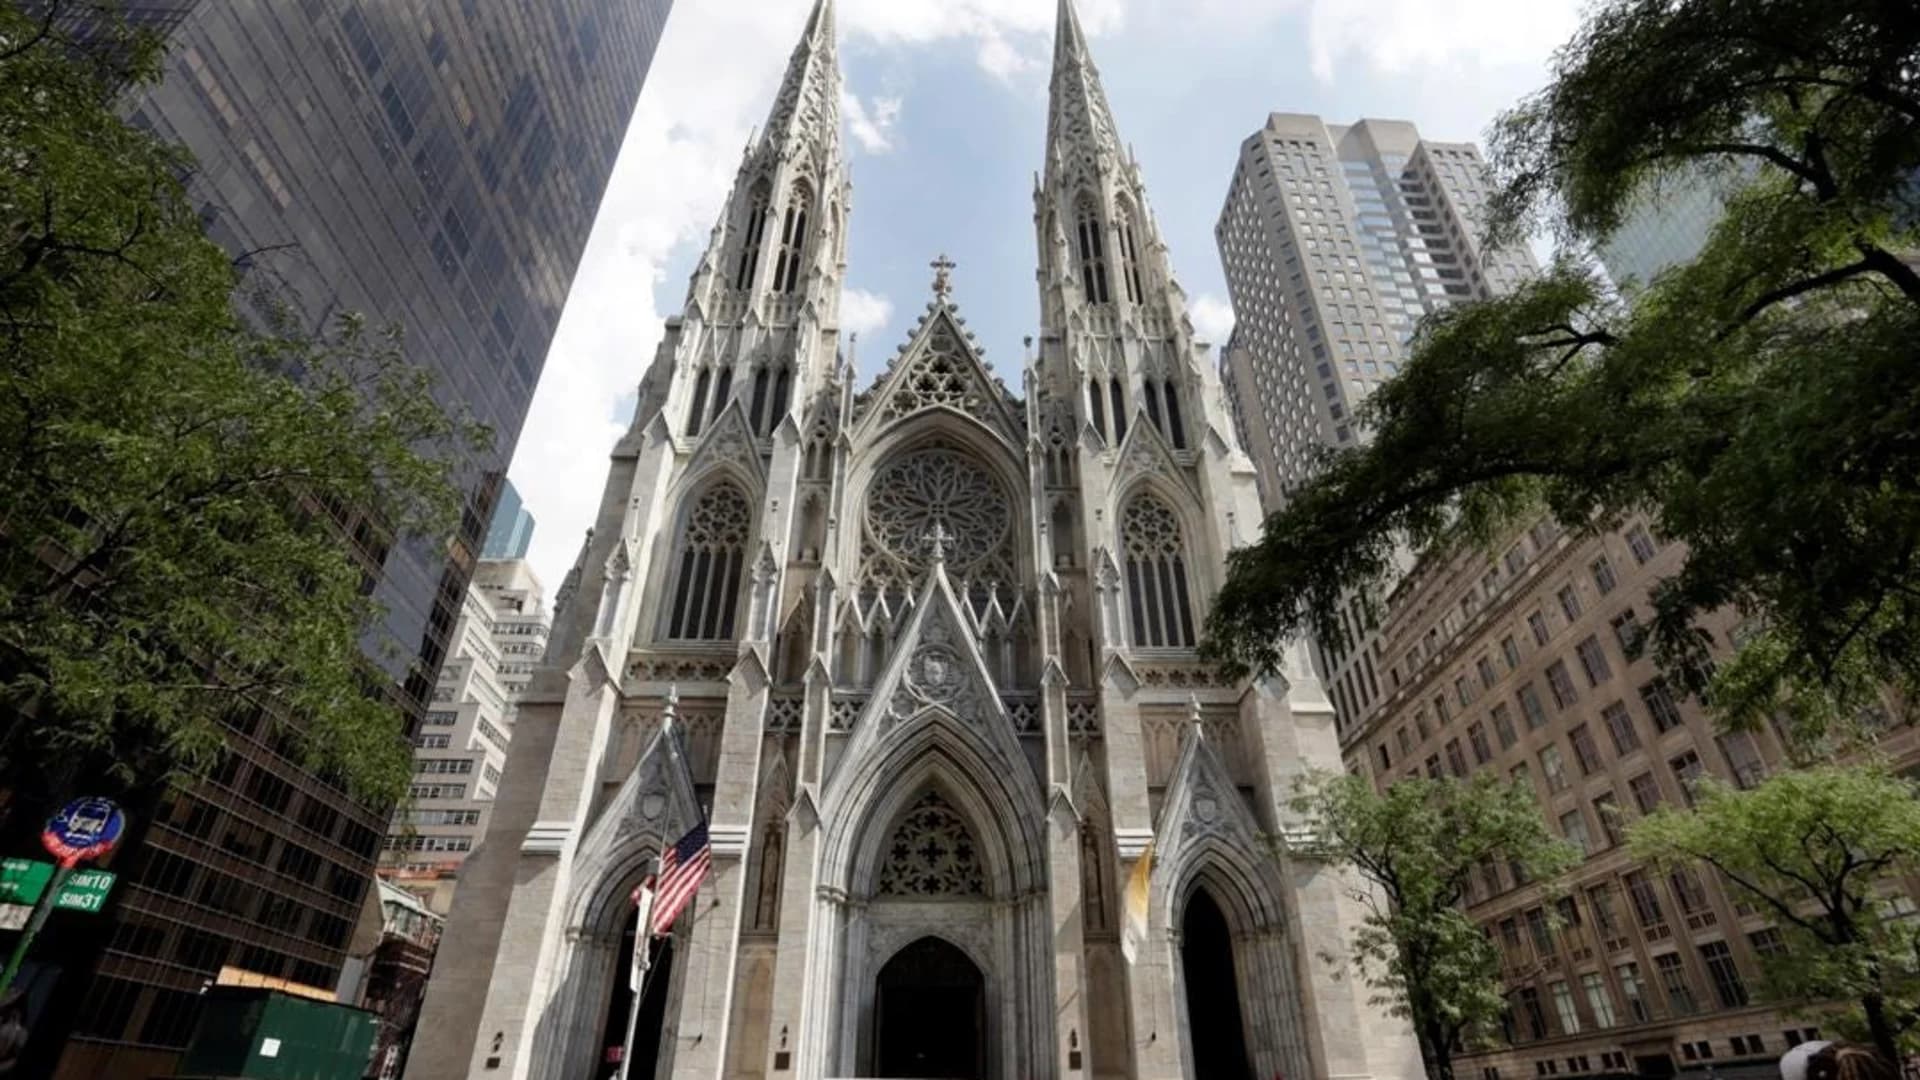 NYPD: Man with gas cans arrested at St. Patrick's church